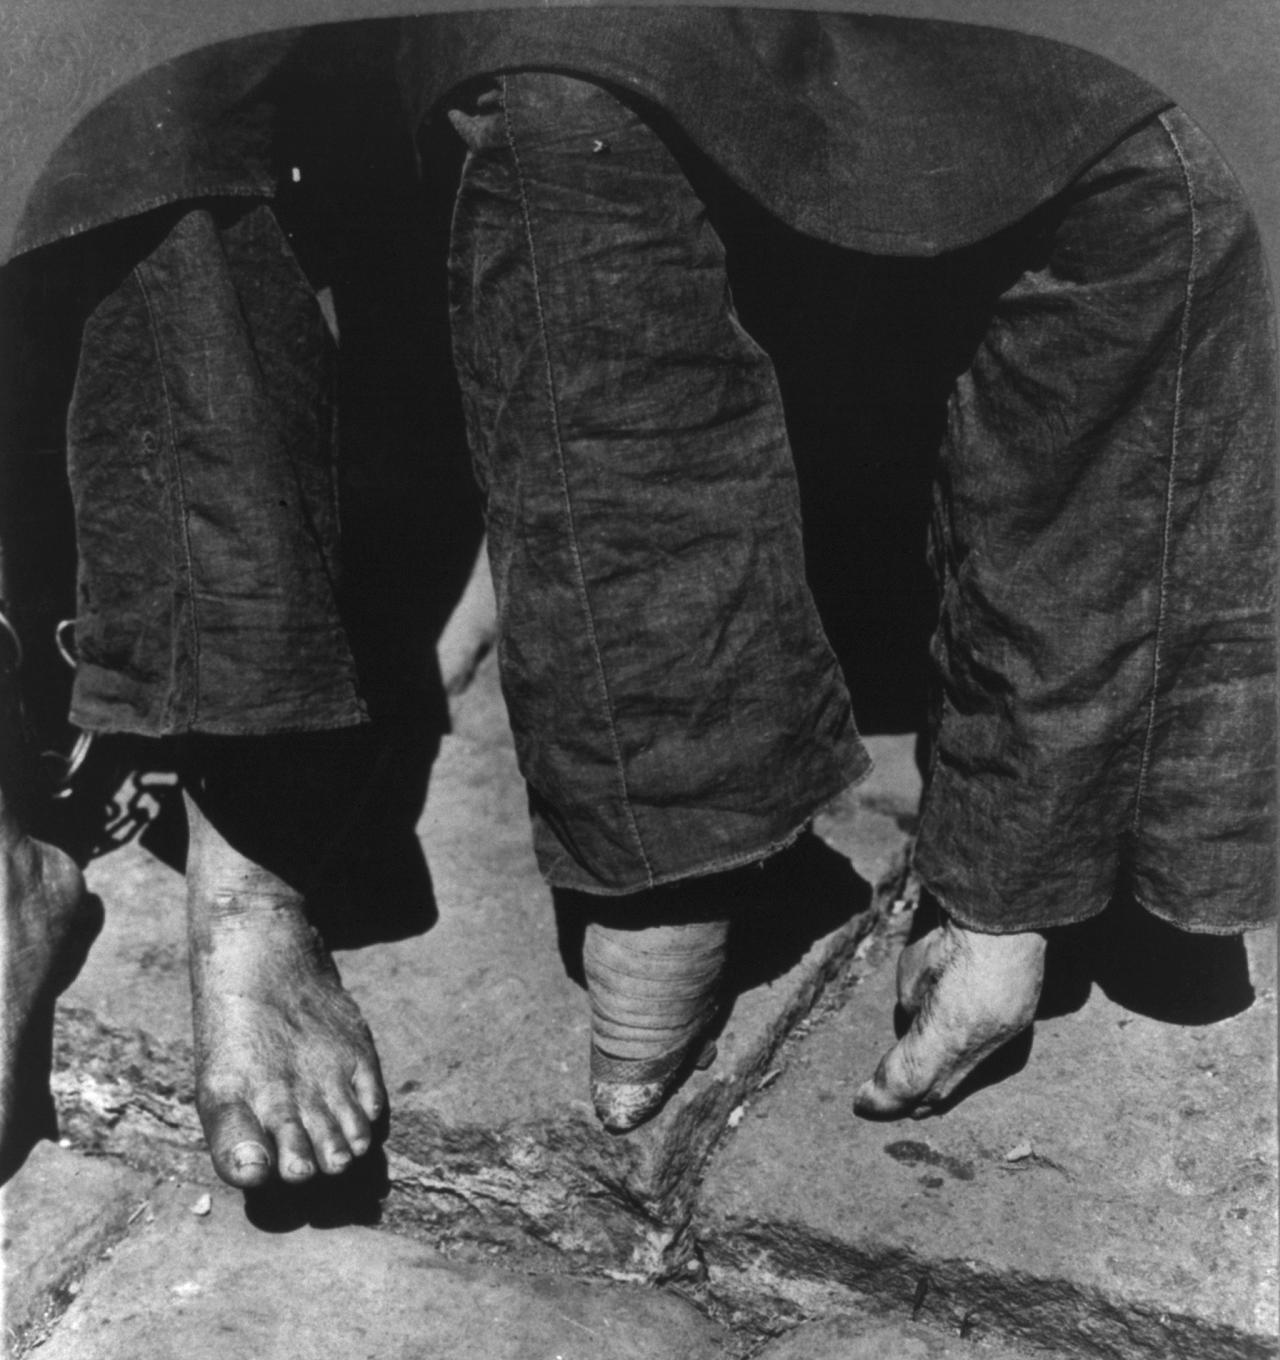 Black and white photograph comparing bound and unbound feet.